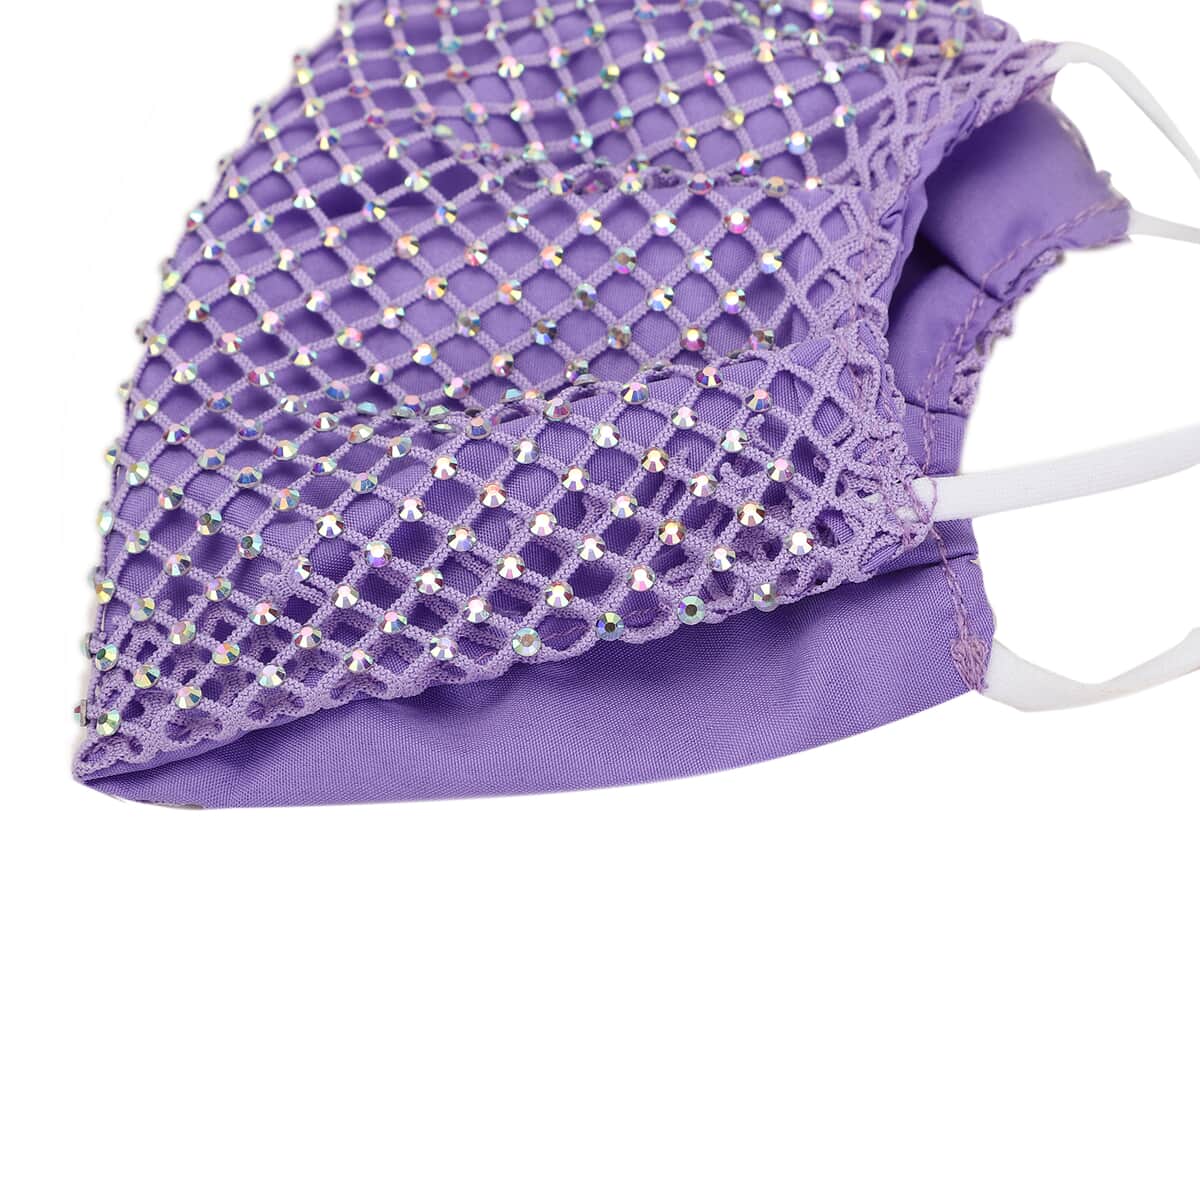 Purple Mesh with Sparkling Color Crystal Rhinestones 2 Ply Fashion Mask (Non-Returnable) image number 3